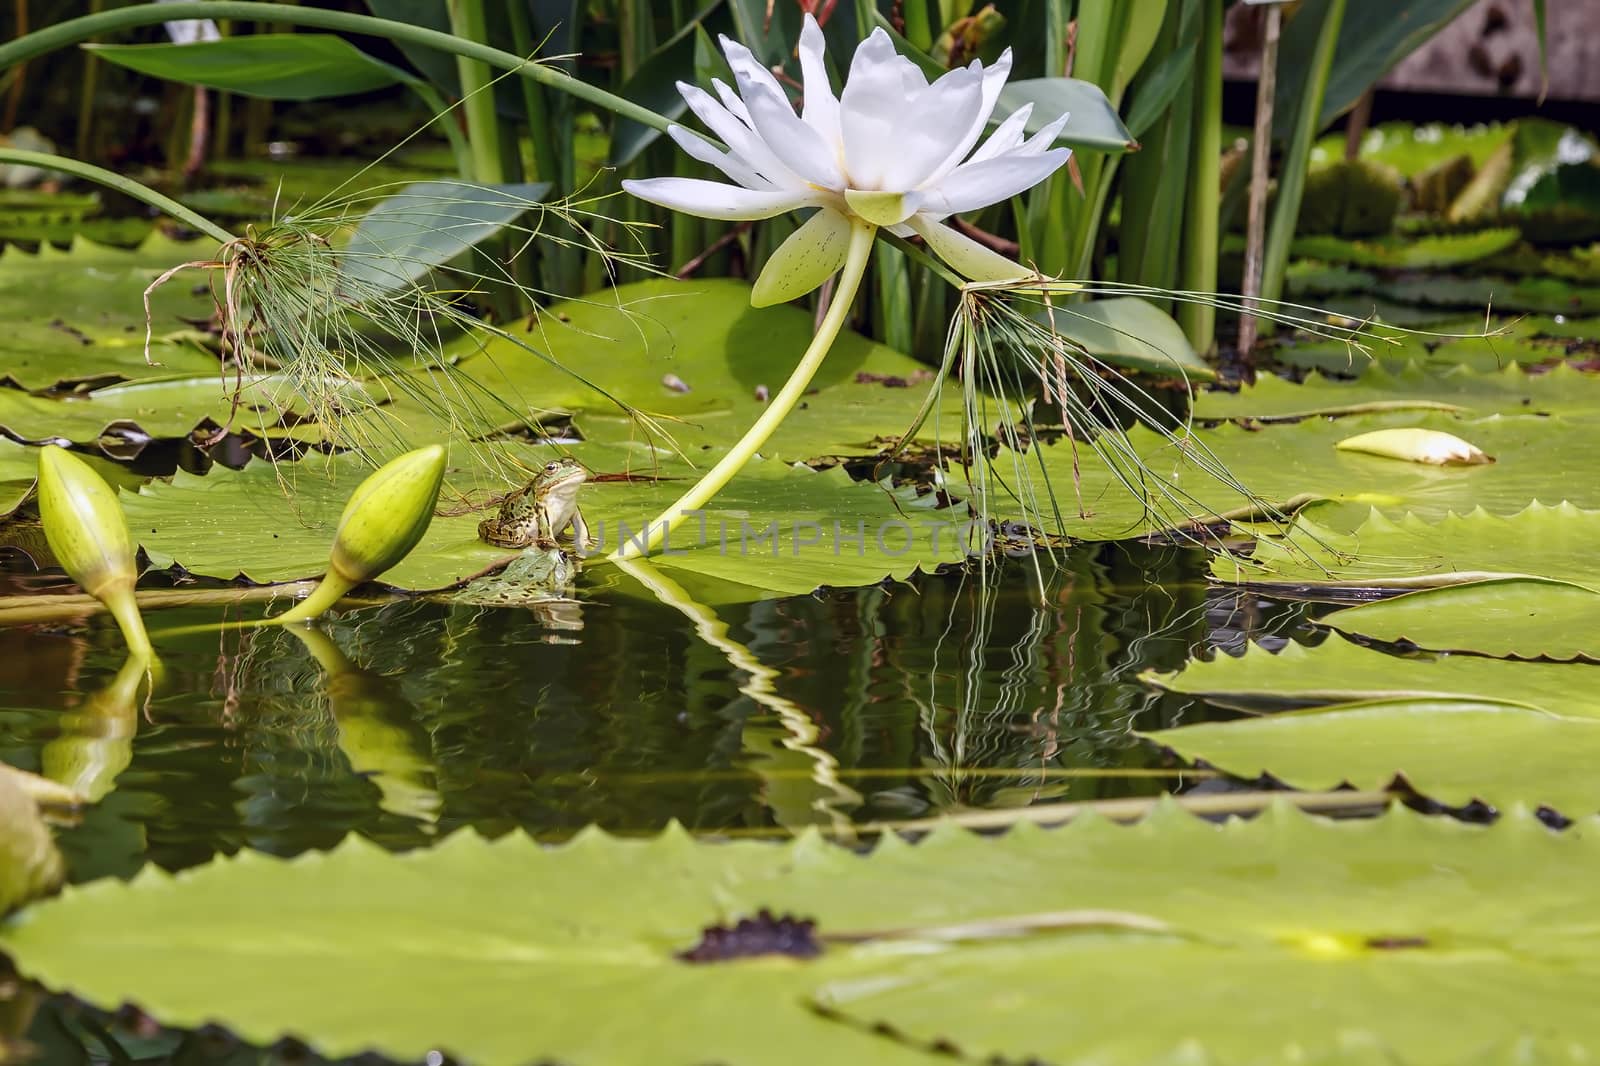 Two frogs, one on a lotus leaf